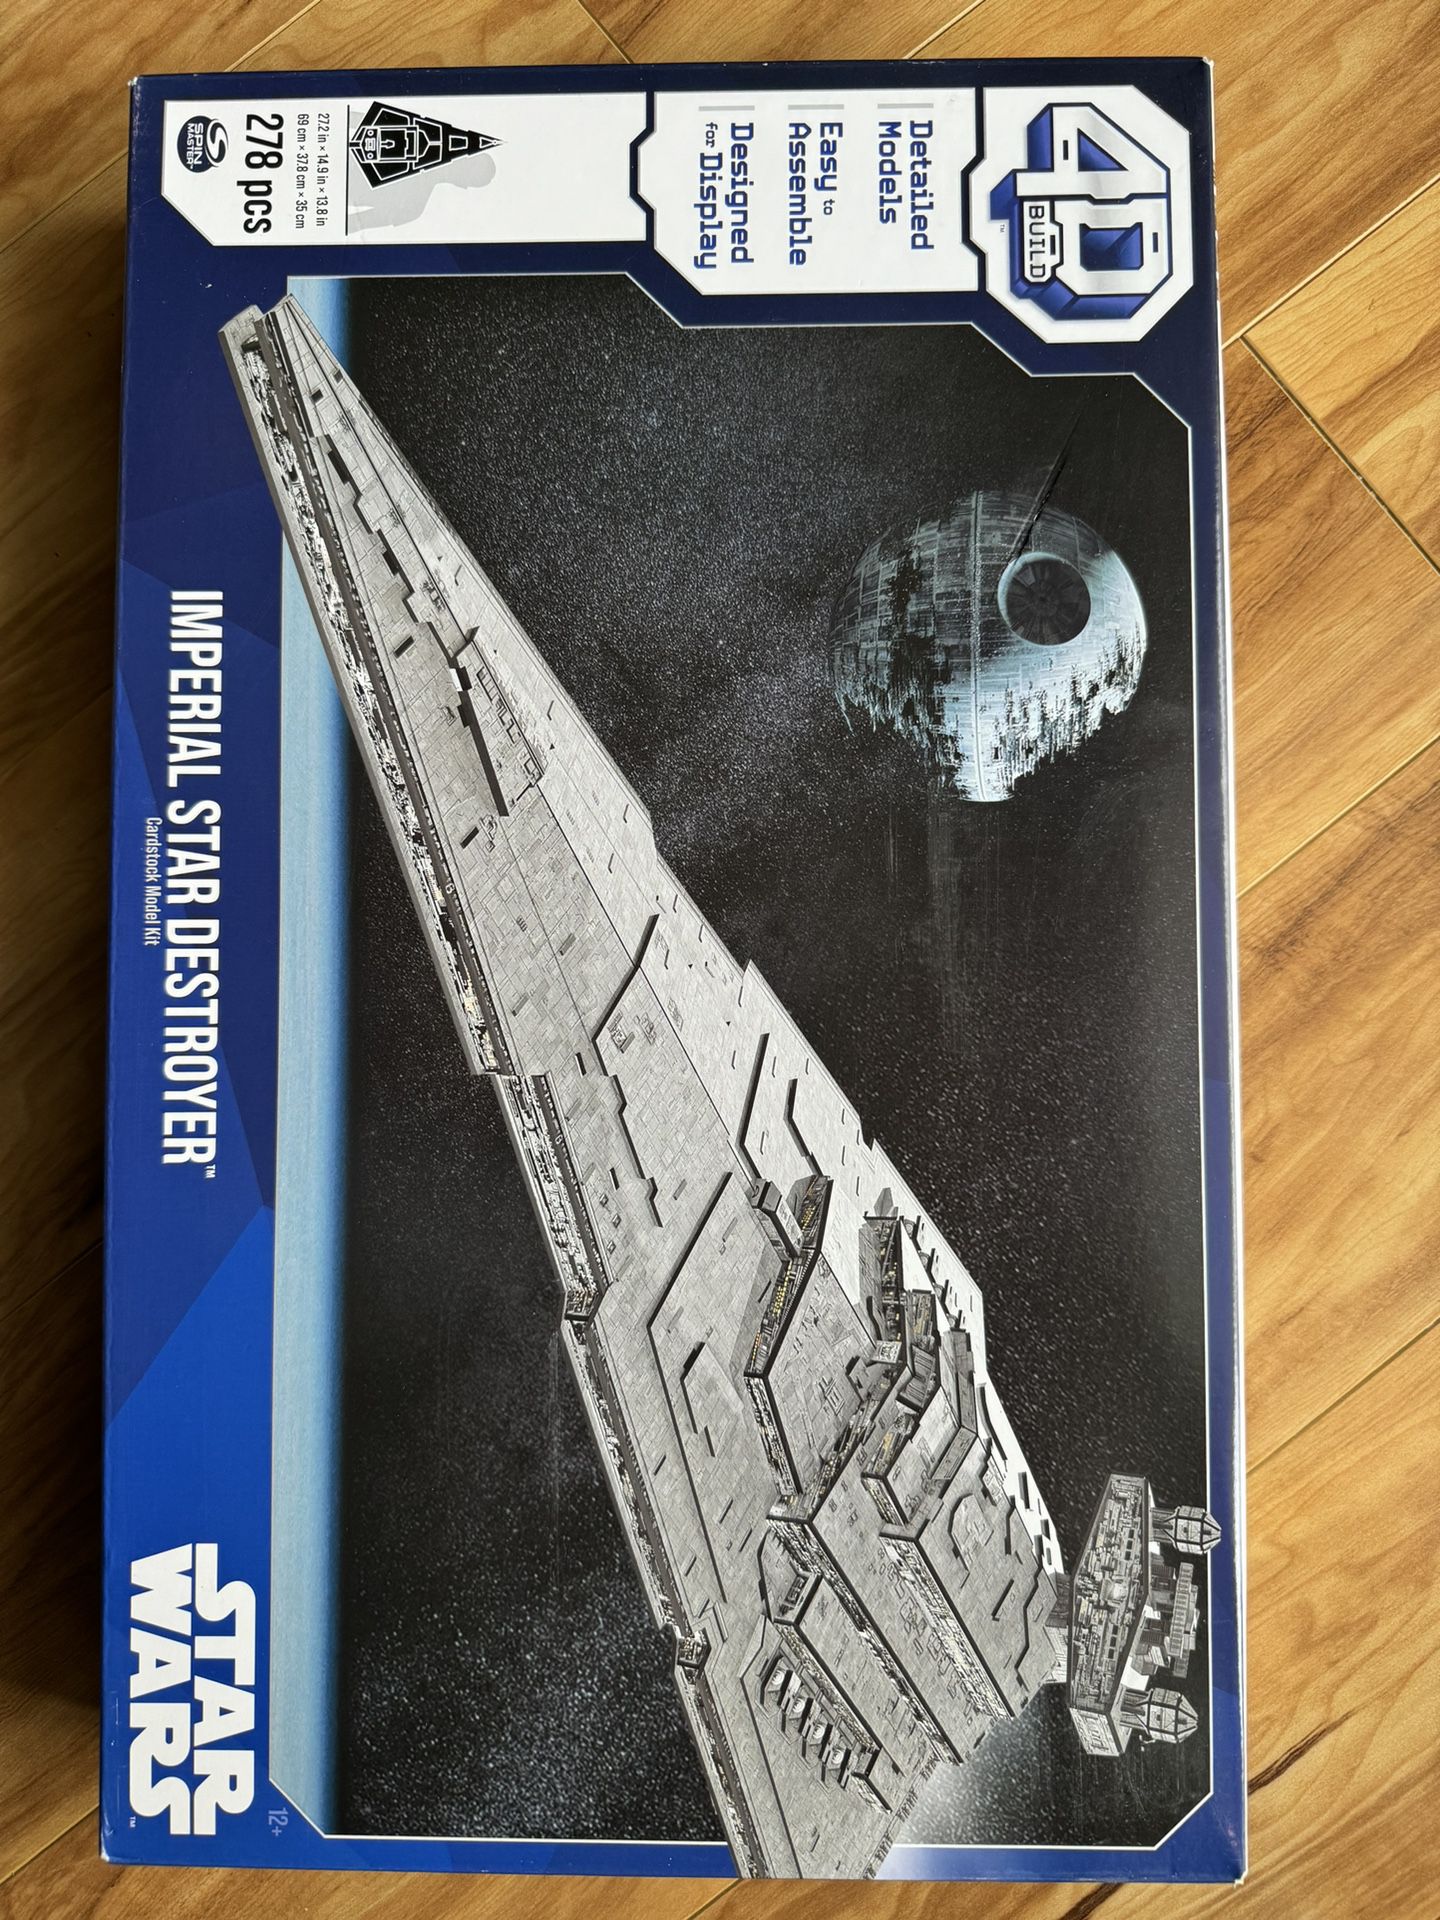 Brand New Star Wars Deluxe Imperial Star Destroyer 3D Model 278 Piece